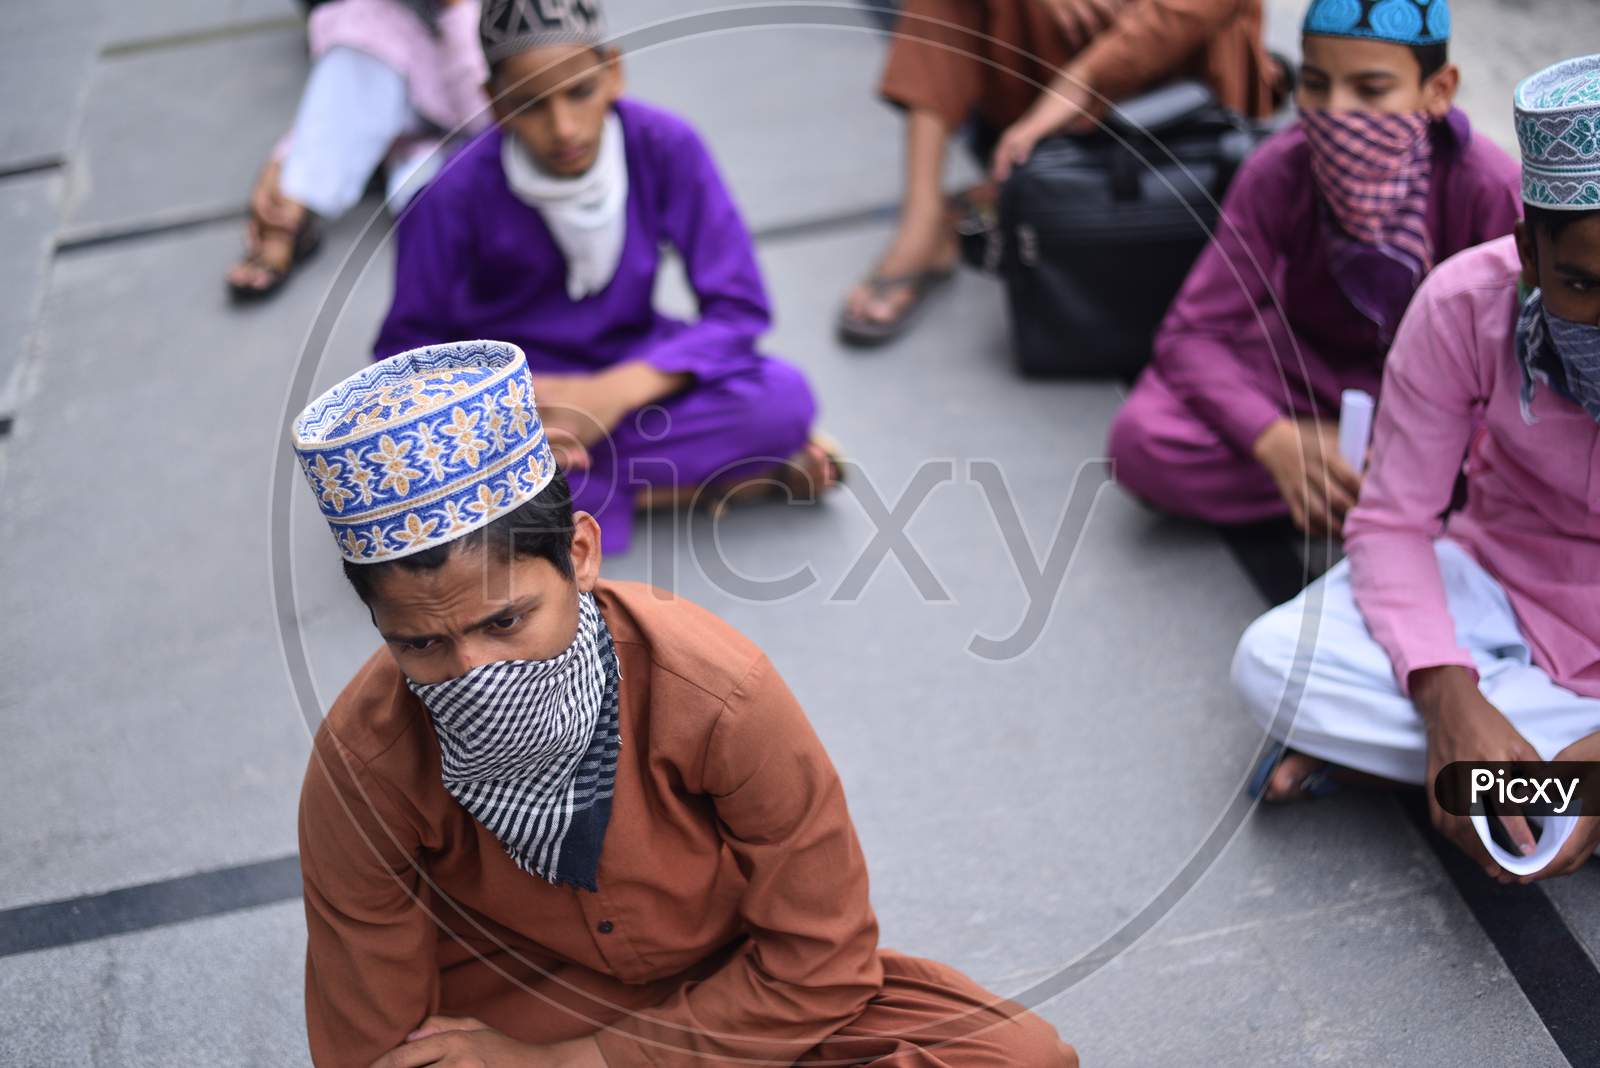 Muslim students from Bihar who study in a Madrassa (Madarsa) in Borabanda, Hyderabad wait for registering with Police to board a Sharamik Special Train from Secunderabad. Kukatpally Y Junction, Hyderabad, May 19,2020.